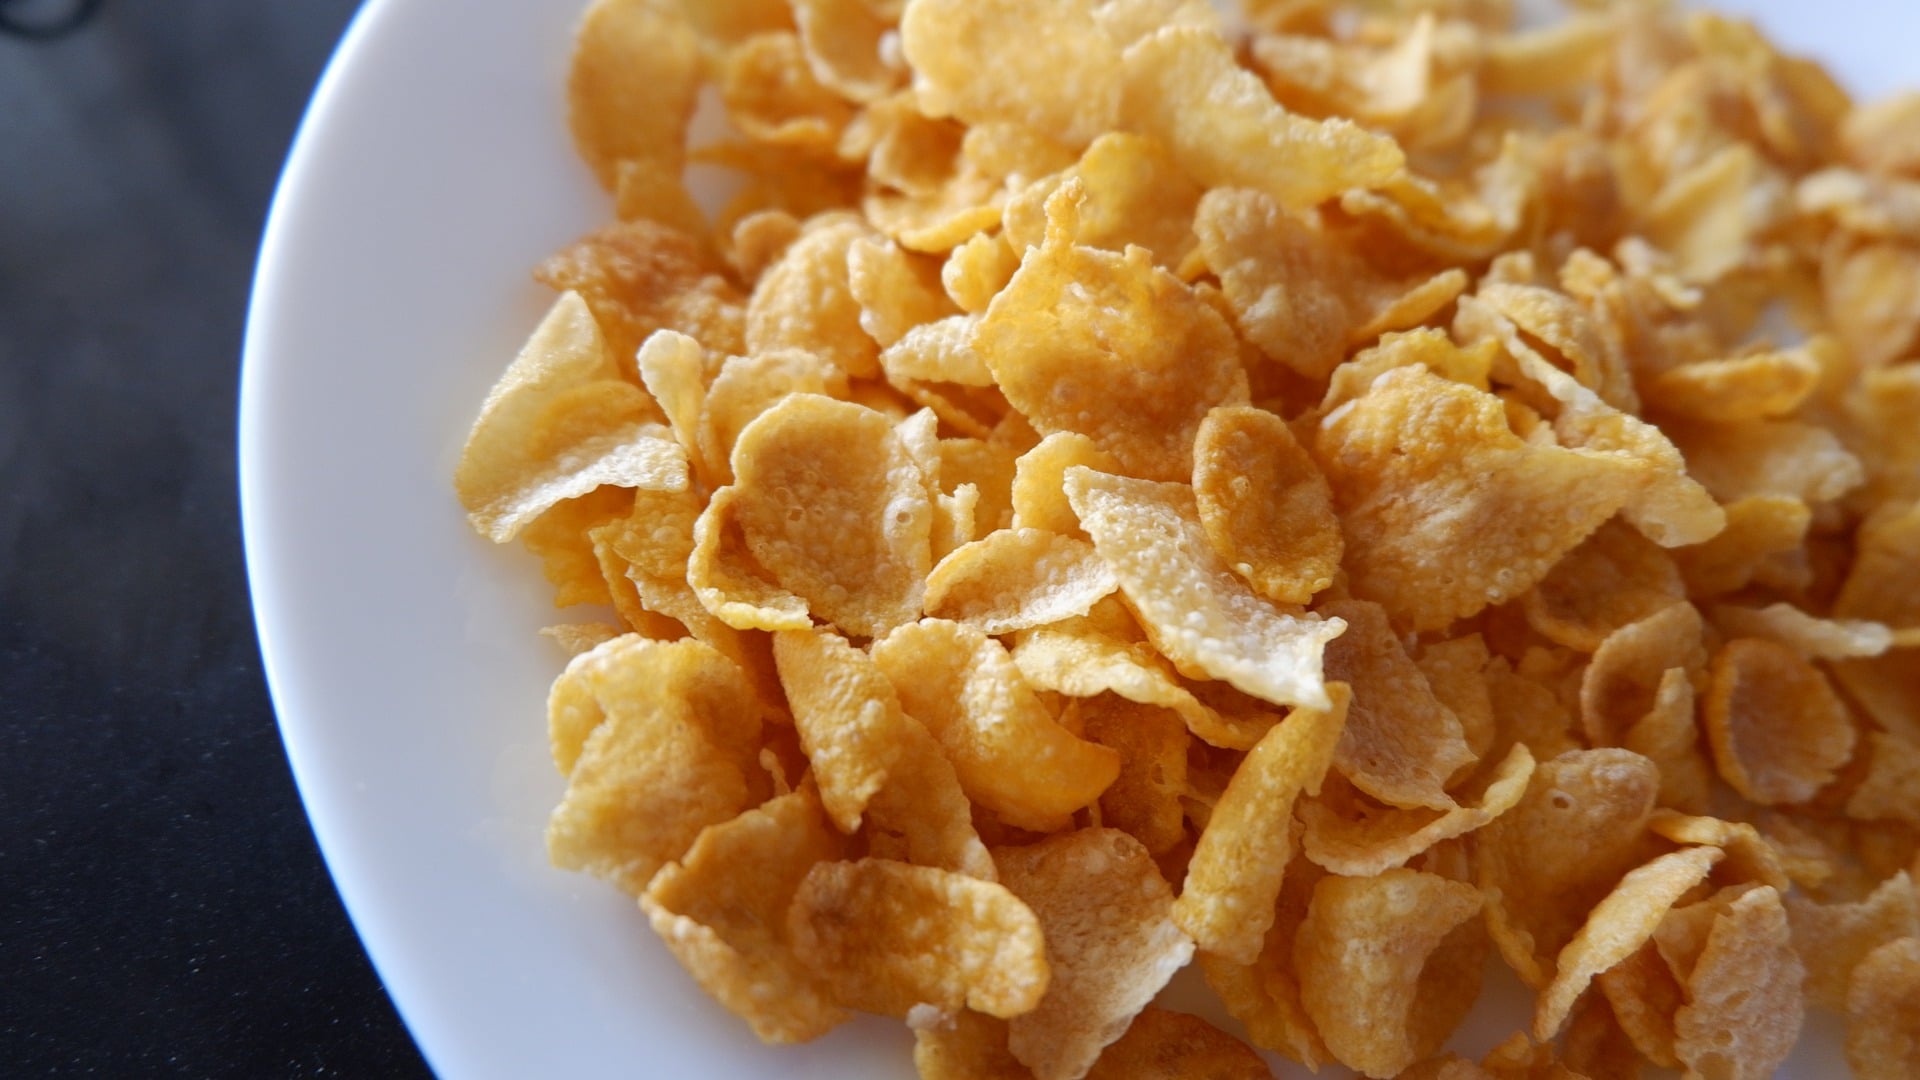 is cornflakes a good snack